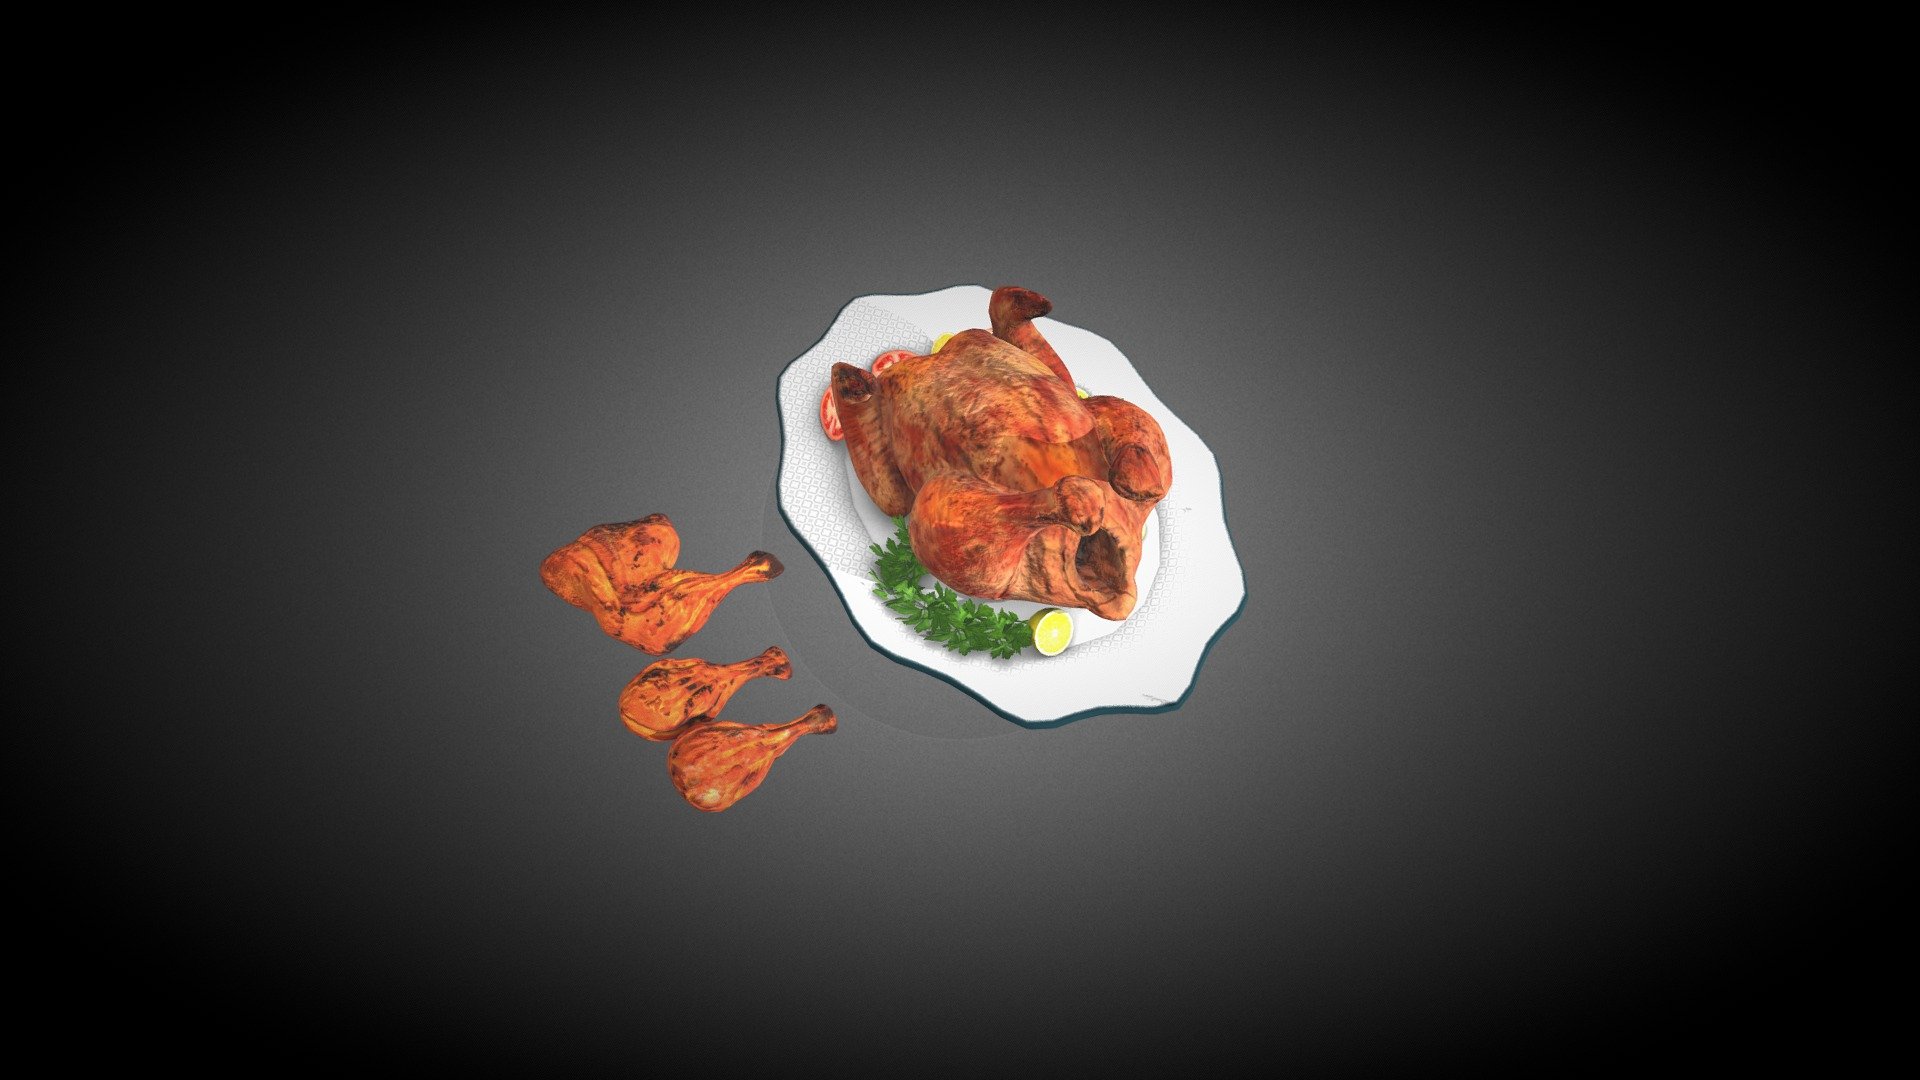 Grilled Chicken Pack contains low poly 3D models of fastfoods with High Quality textures to fill up your game environment. The assets are VR-Ready and game ready. 

Total Polygons - 21570

Total Tris - 37462

For Unity3d (Built-in, URP, HDRP) Ready Assets visit our Unity Asset Store Page

Enjoy and please rate the asset!

Contact us on for AR/VR related queries and development support

Gmail - designer@devdensolutions.com

Website

Twitter

Instagram

Facebook

Linkedin

Youtube - Grilled Chicken - Buy Royalty Free 3D model by Devden 3d model